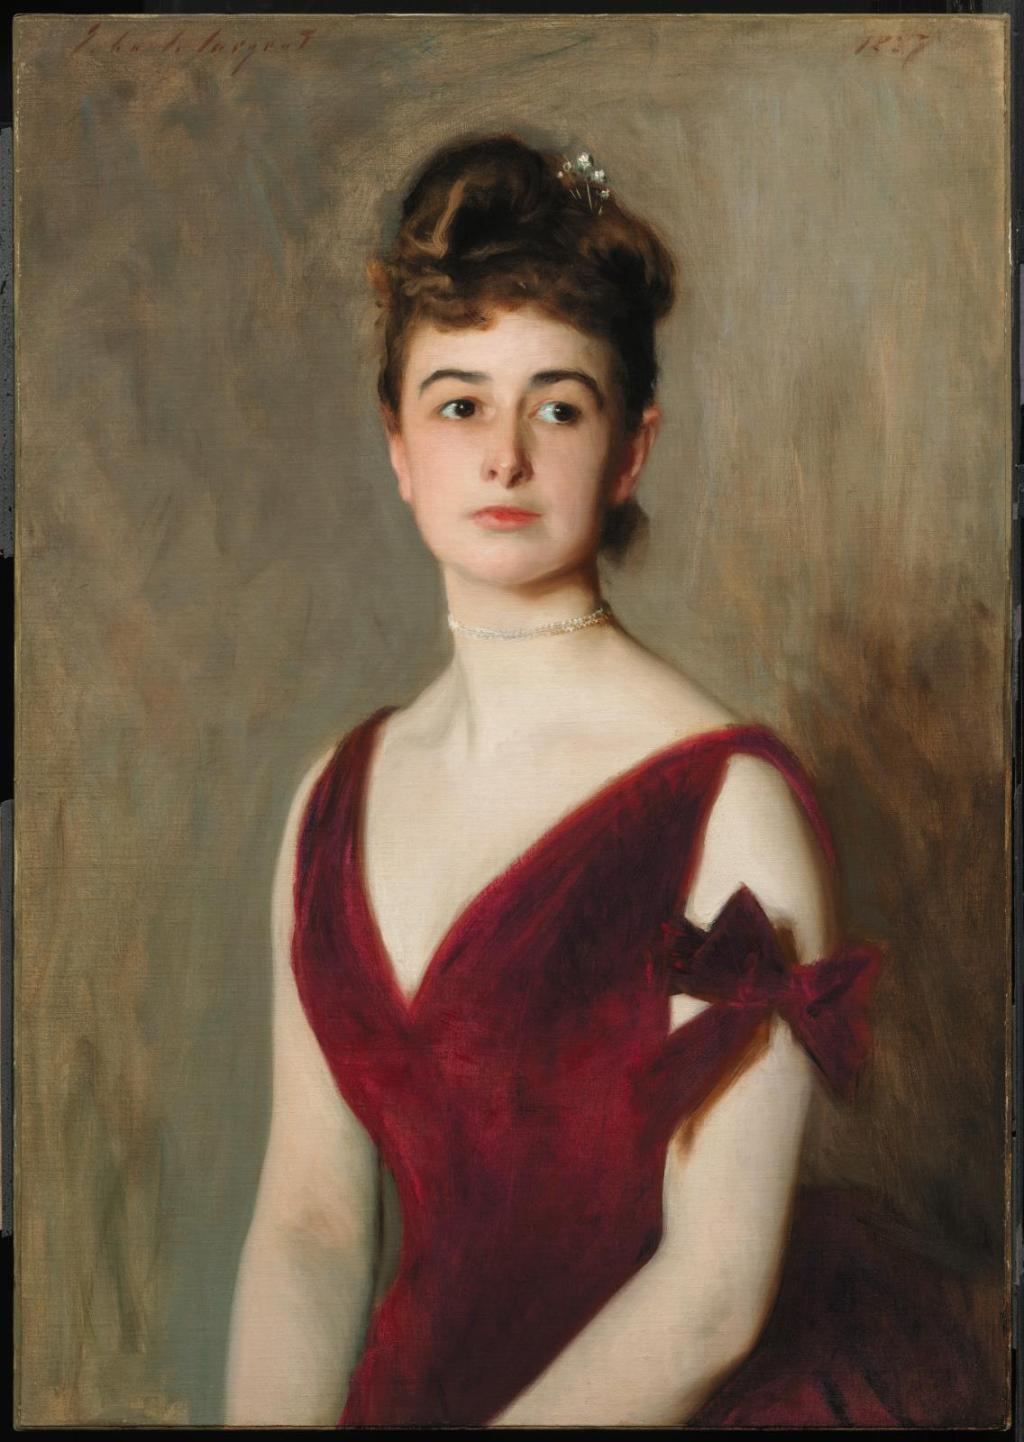 Antoine and the Red Dress